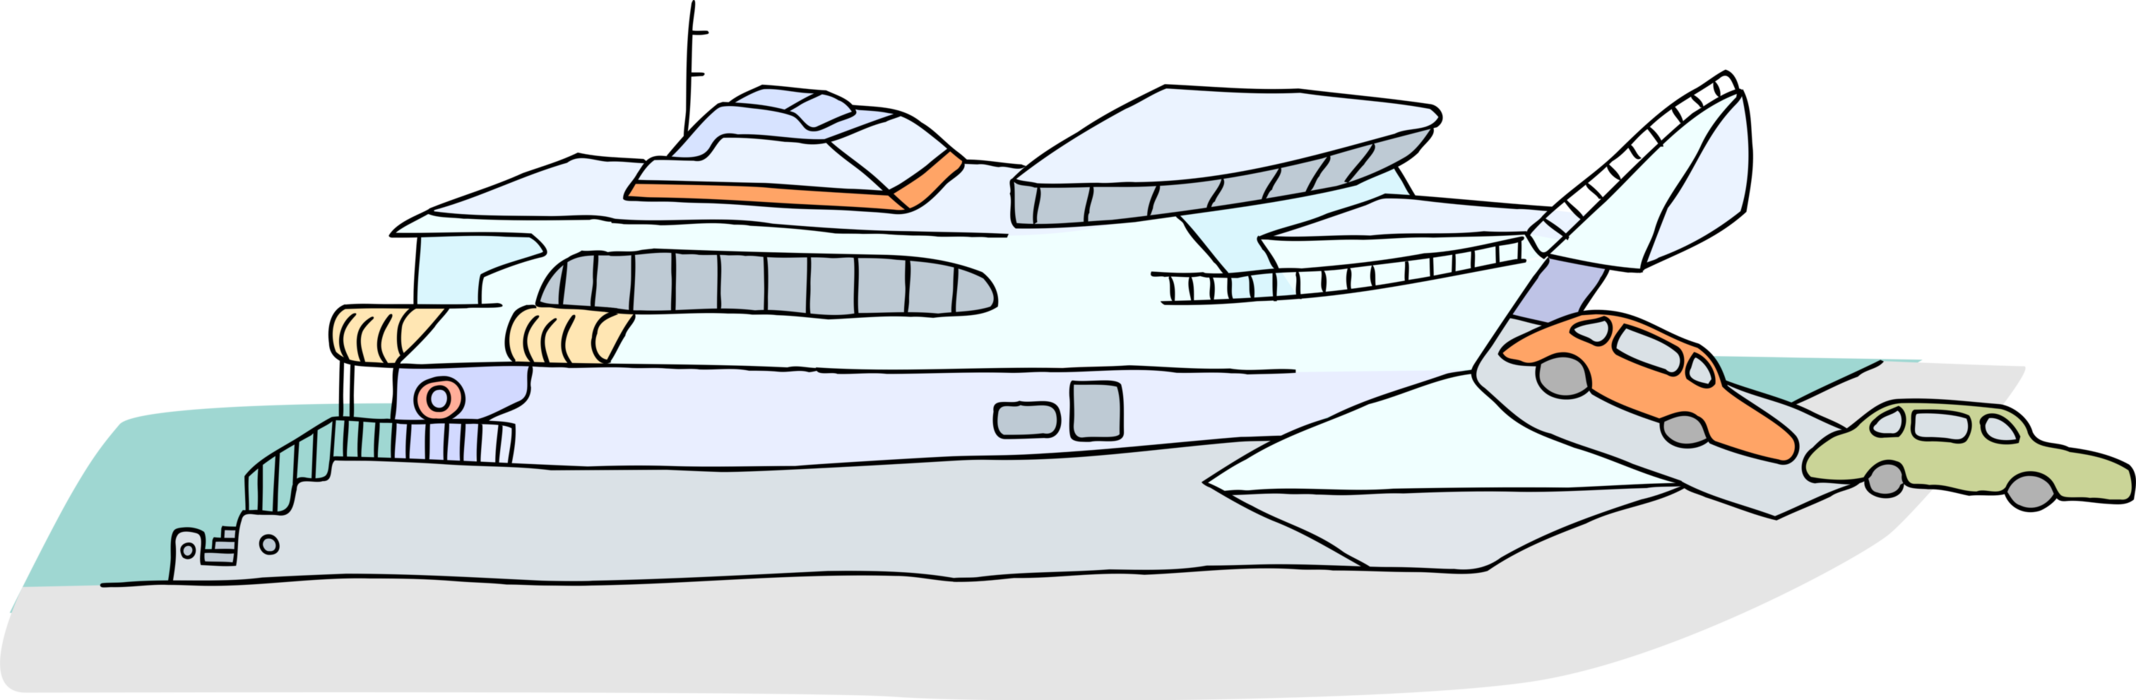 Vector Illustration of Docking Ferry or Ferryboat Transports Car Automobiles and Passengers Across Water